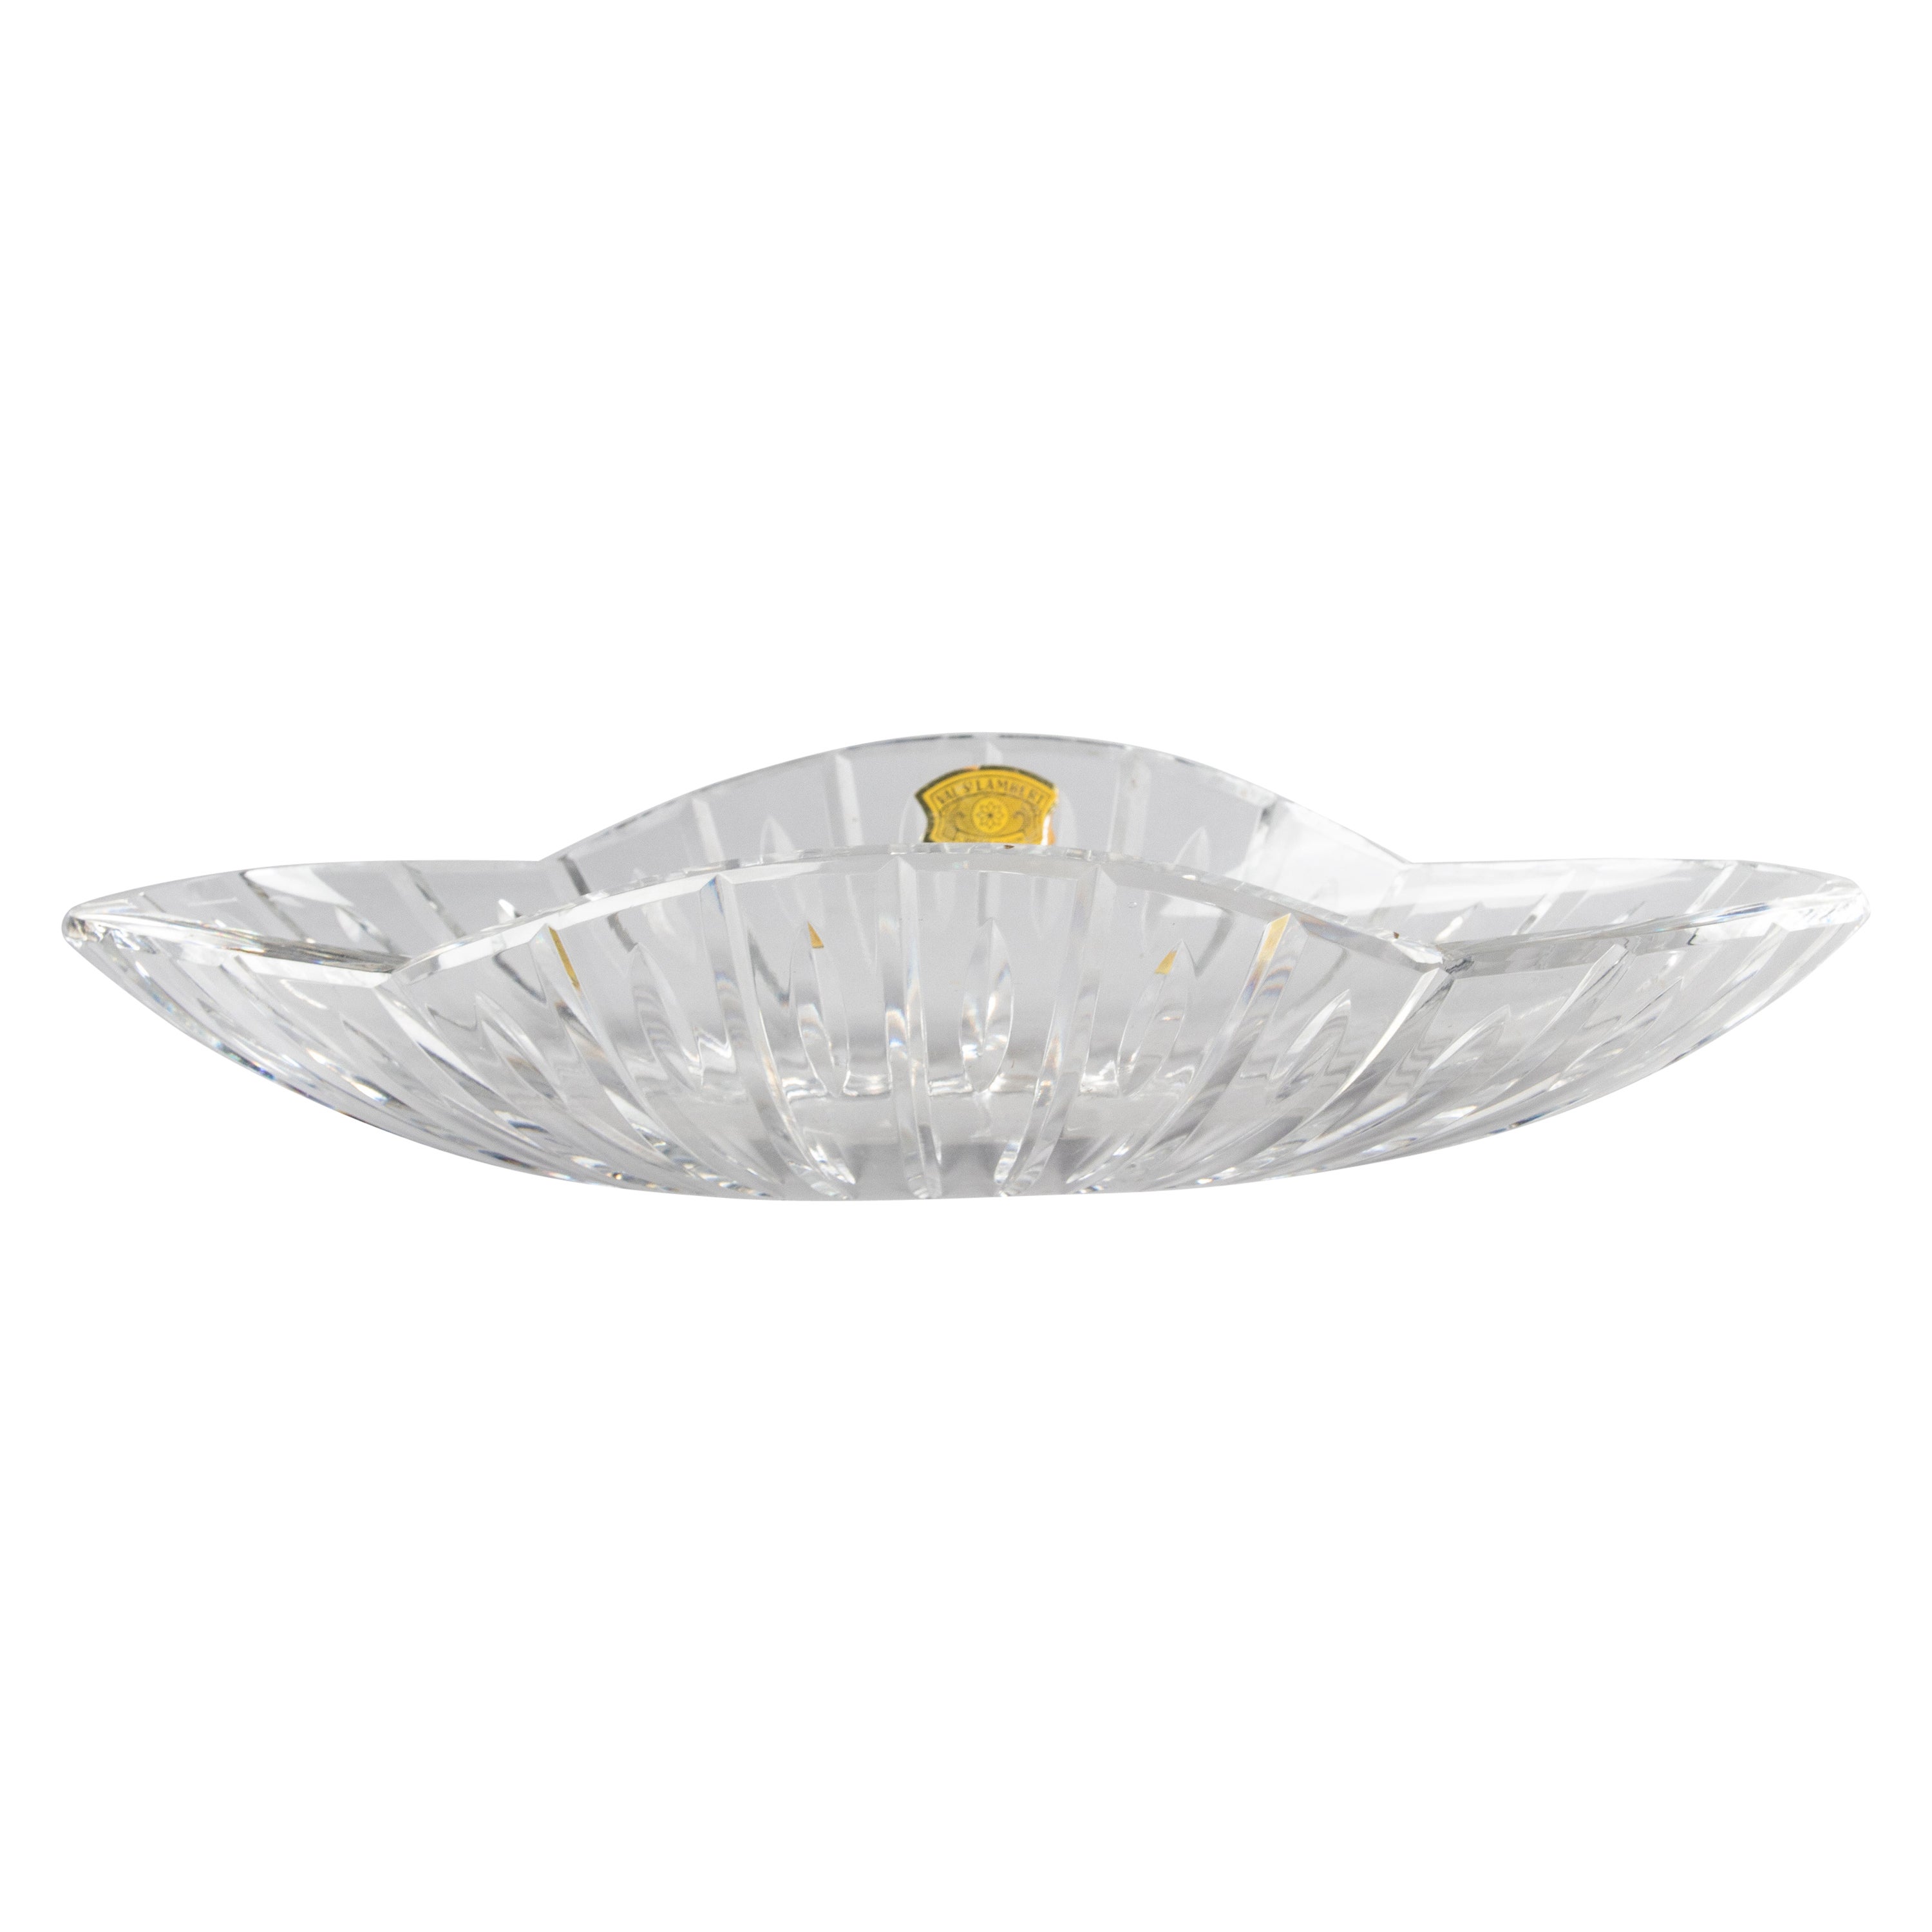 Large Mid-Century Modern Clear Crystal Bowl Made by Val Saint Lambert For Sale